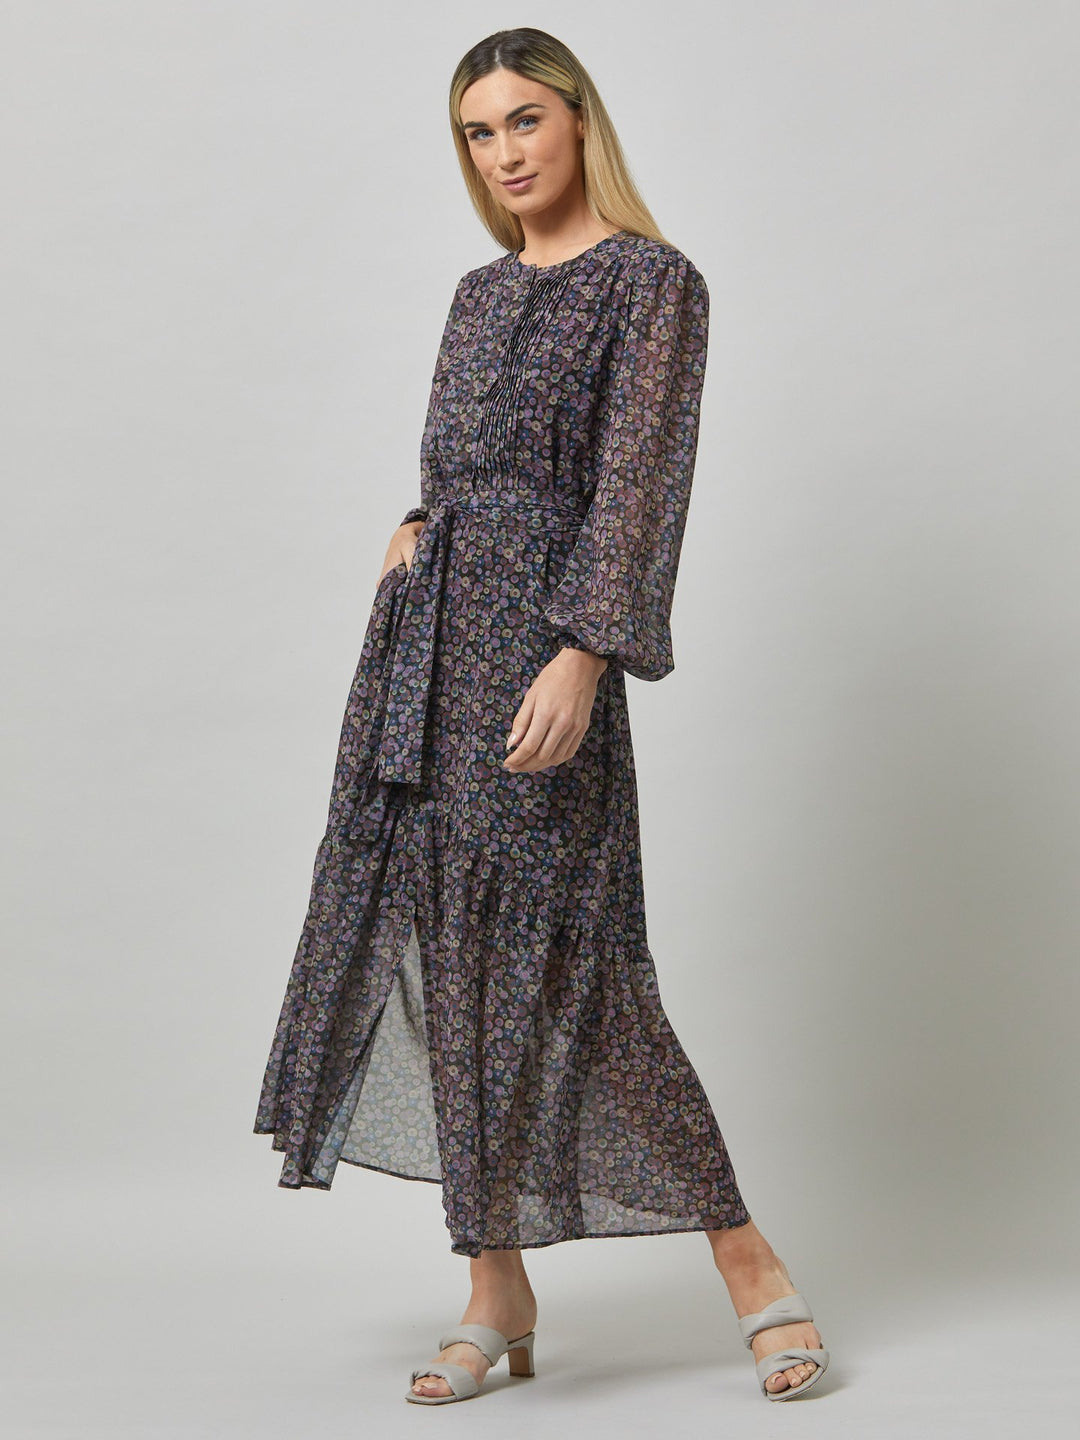 Opt for izzy, the ultimate take-you-anywhere dress. Crafted in breathable viscose georgette in a random multi-coloured dot print. Cut to a fluid silhouette for a timeless mood with a modern look. Note the delicate pin tucked detailed bodice, grandfather collar and flattering flowing skirt. 